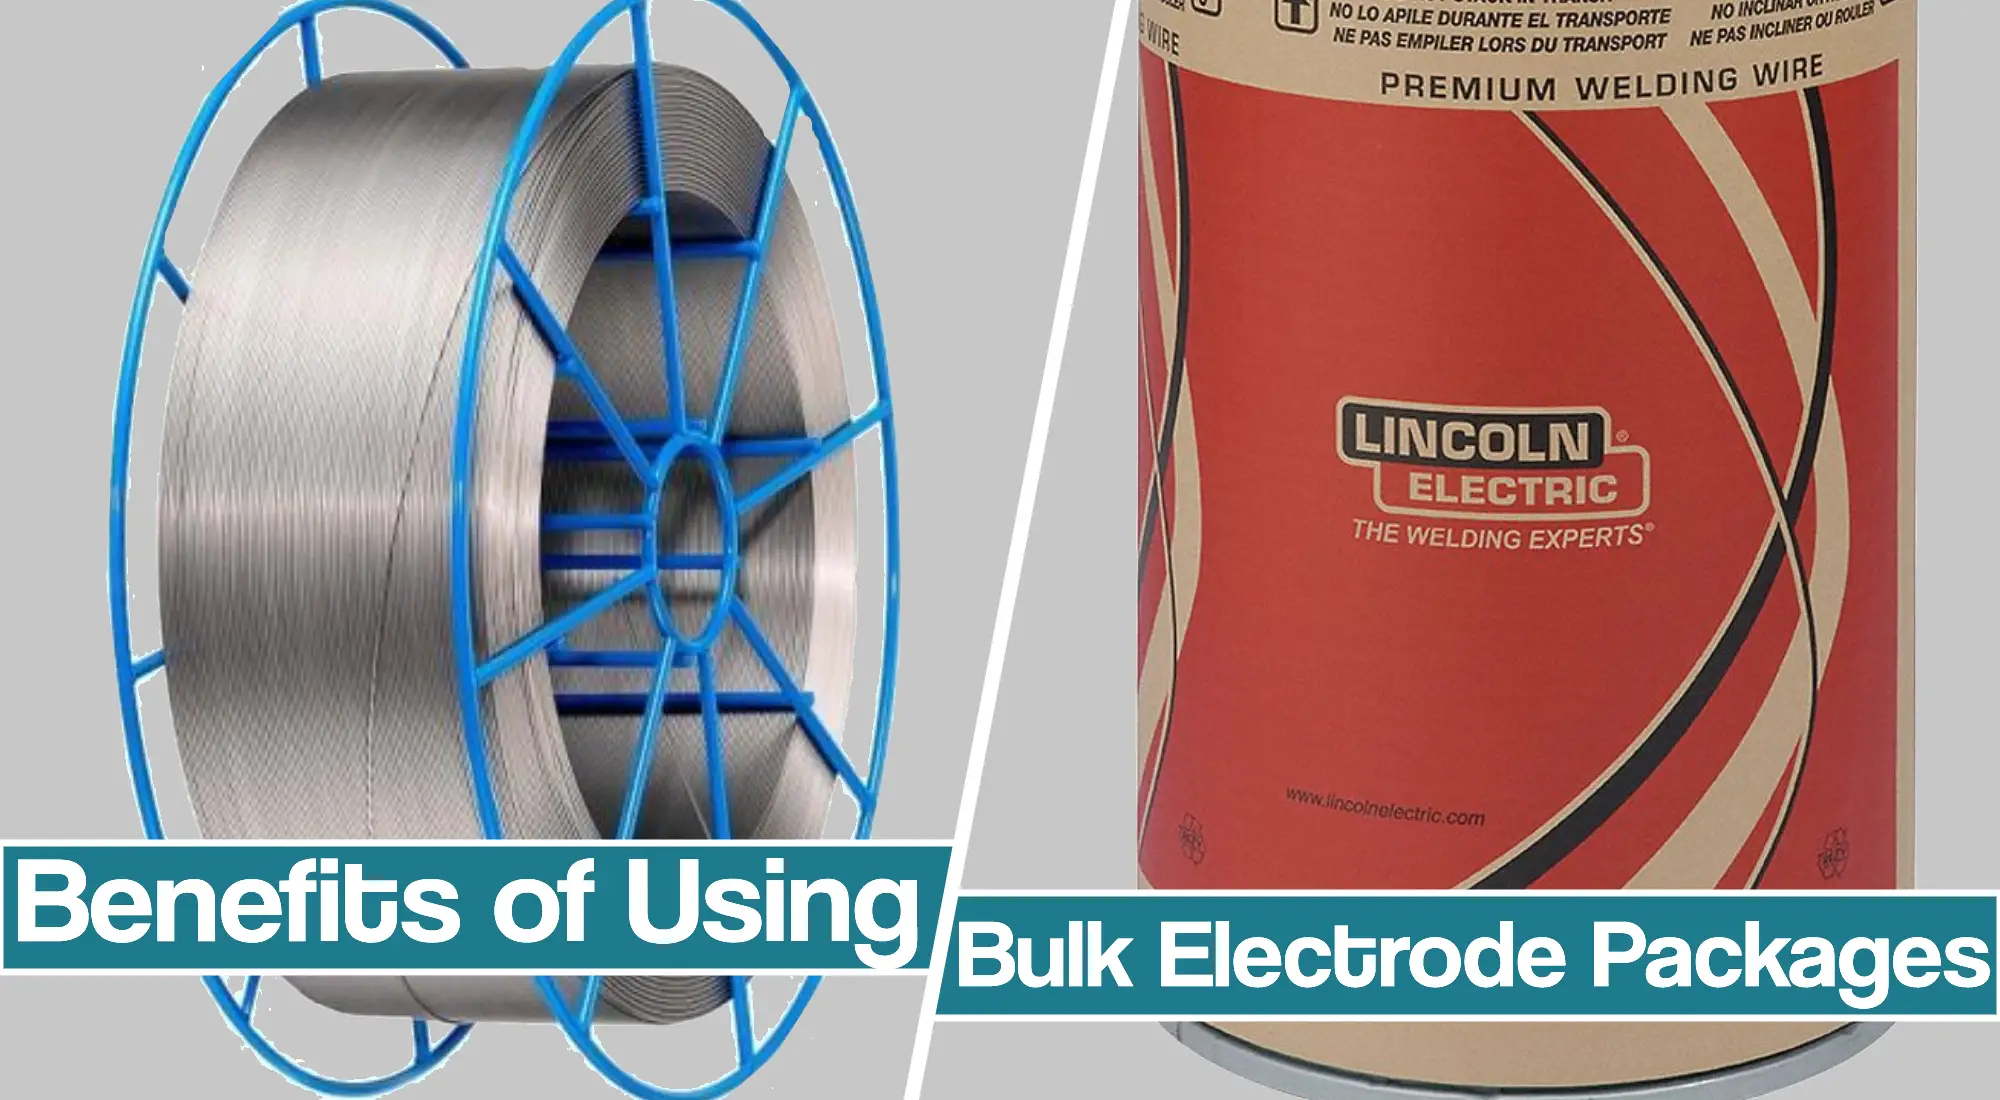 Benefits of Buying Bulk Welding Electrode Packages